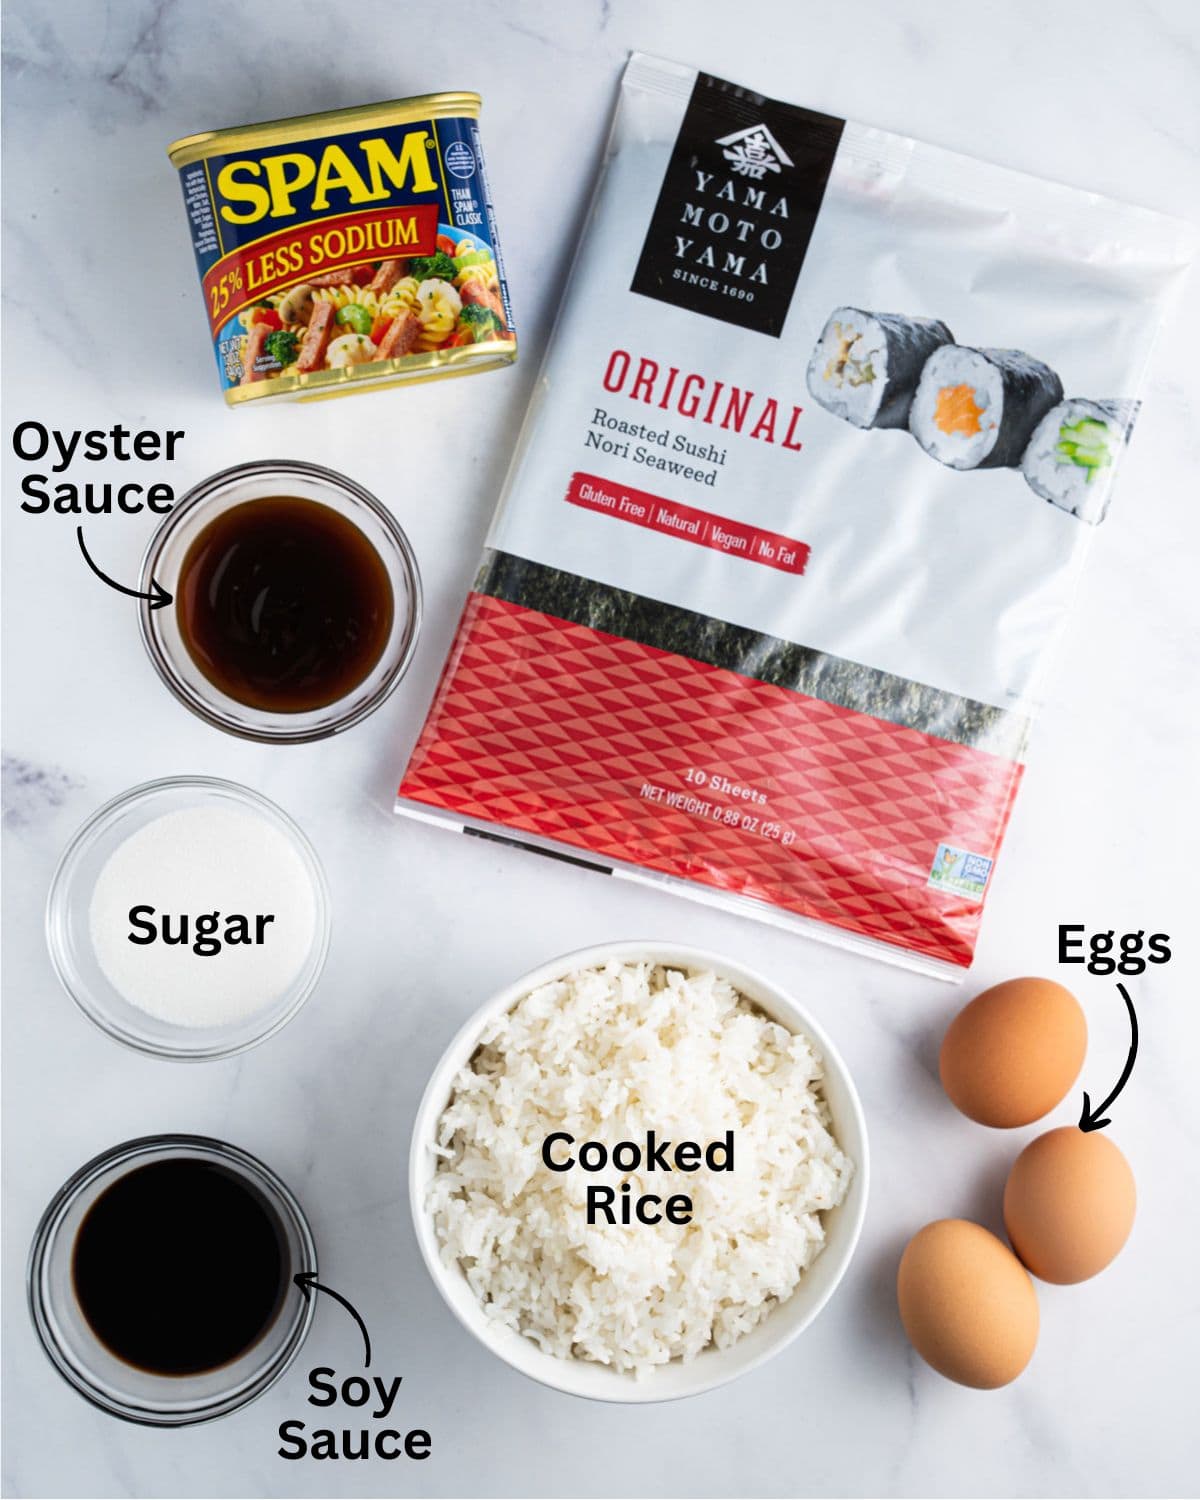 Ingredients needed for spam musubi with eggs: cooked rice, spam, eggs, nori sheet, oyster sauce, soy sauce and sugar.